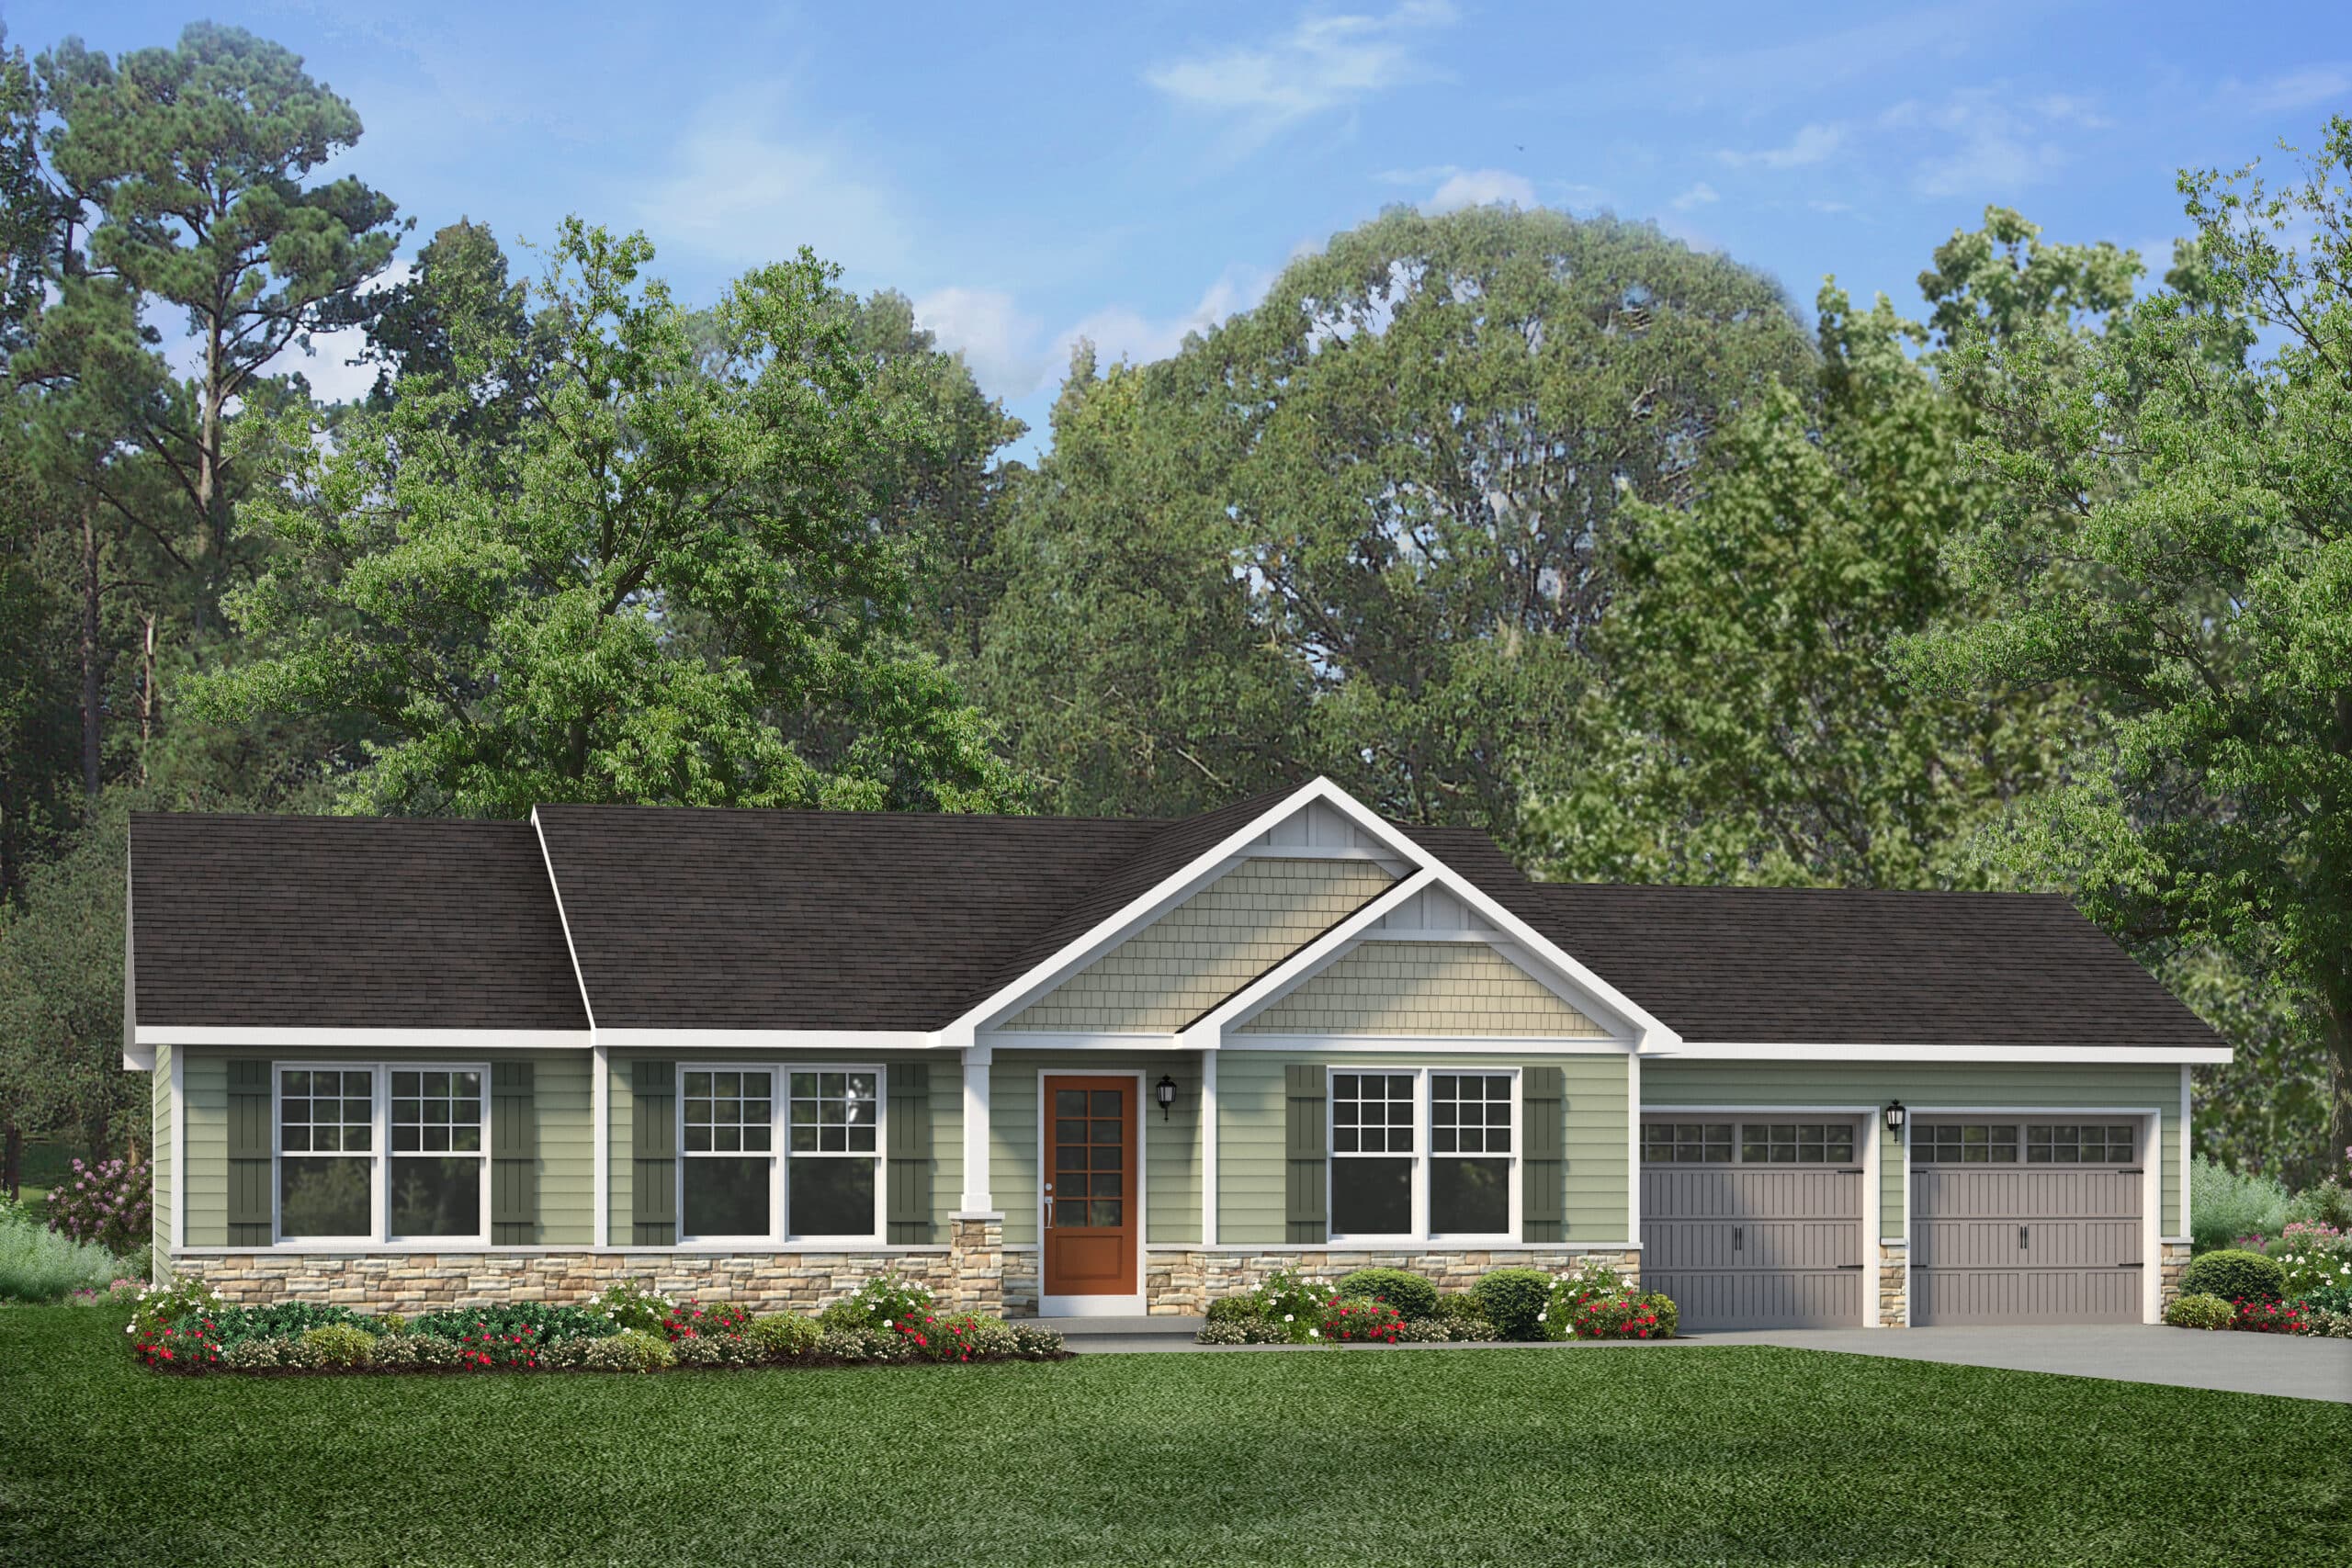 Digital rendering of ranch style home